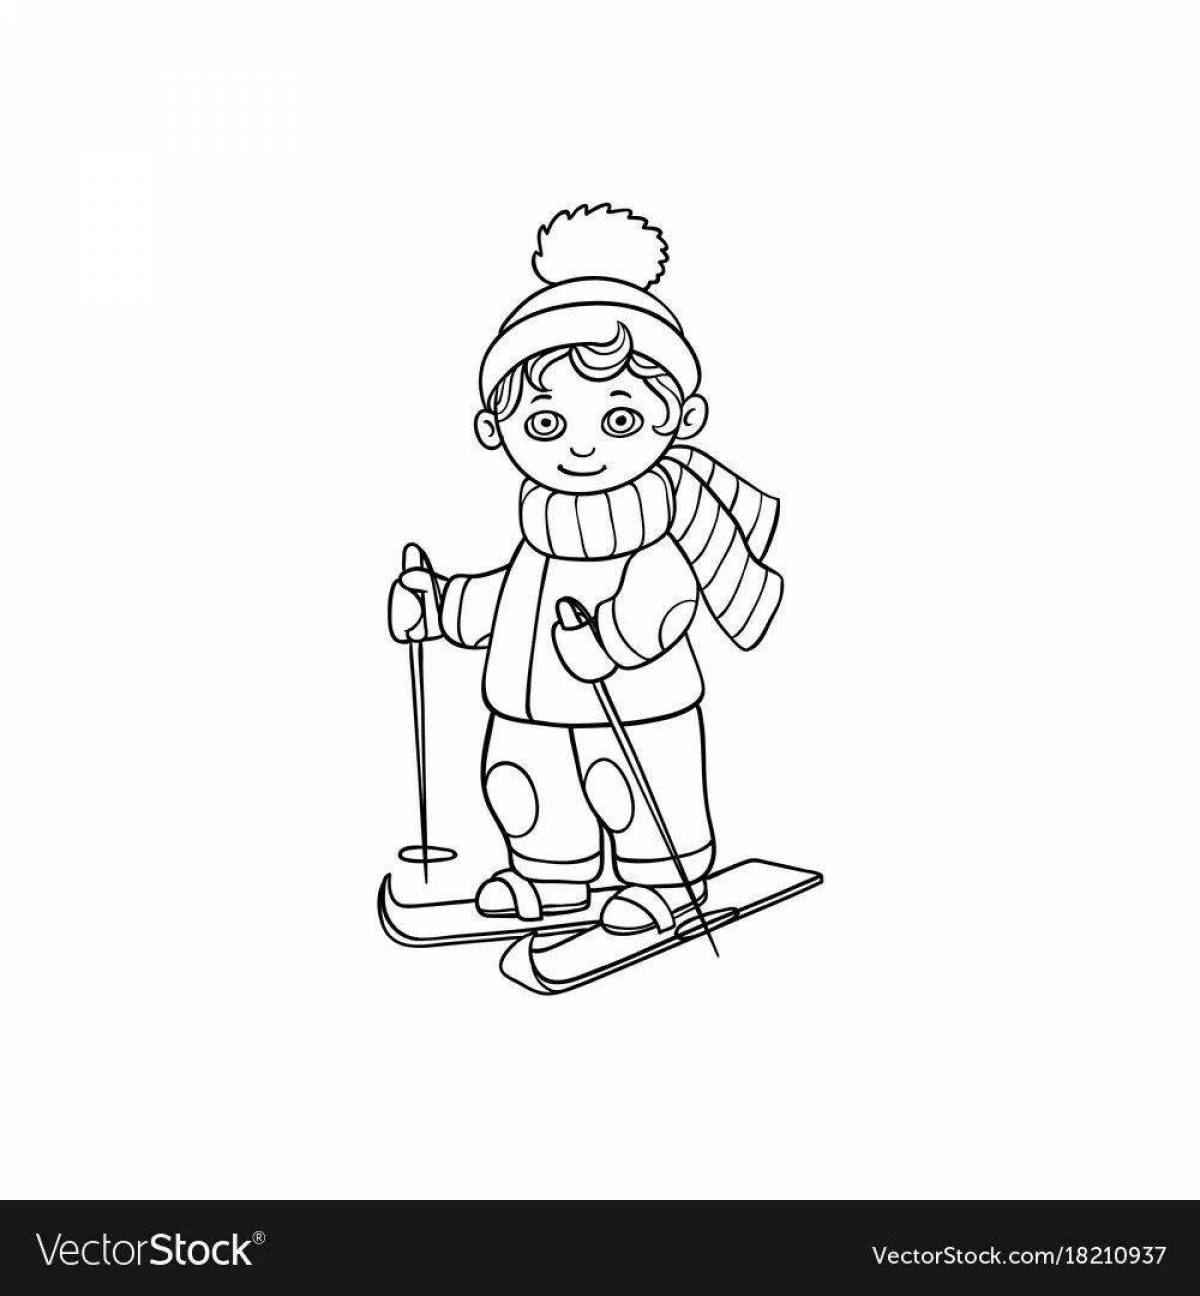 Coloring book intriguing boy on skis